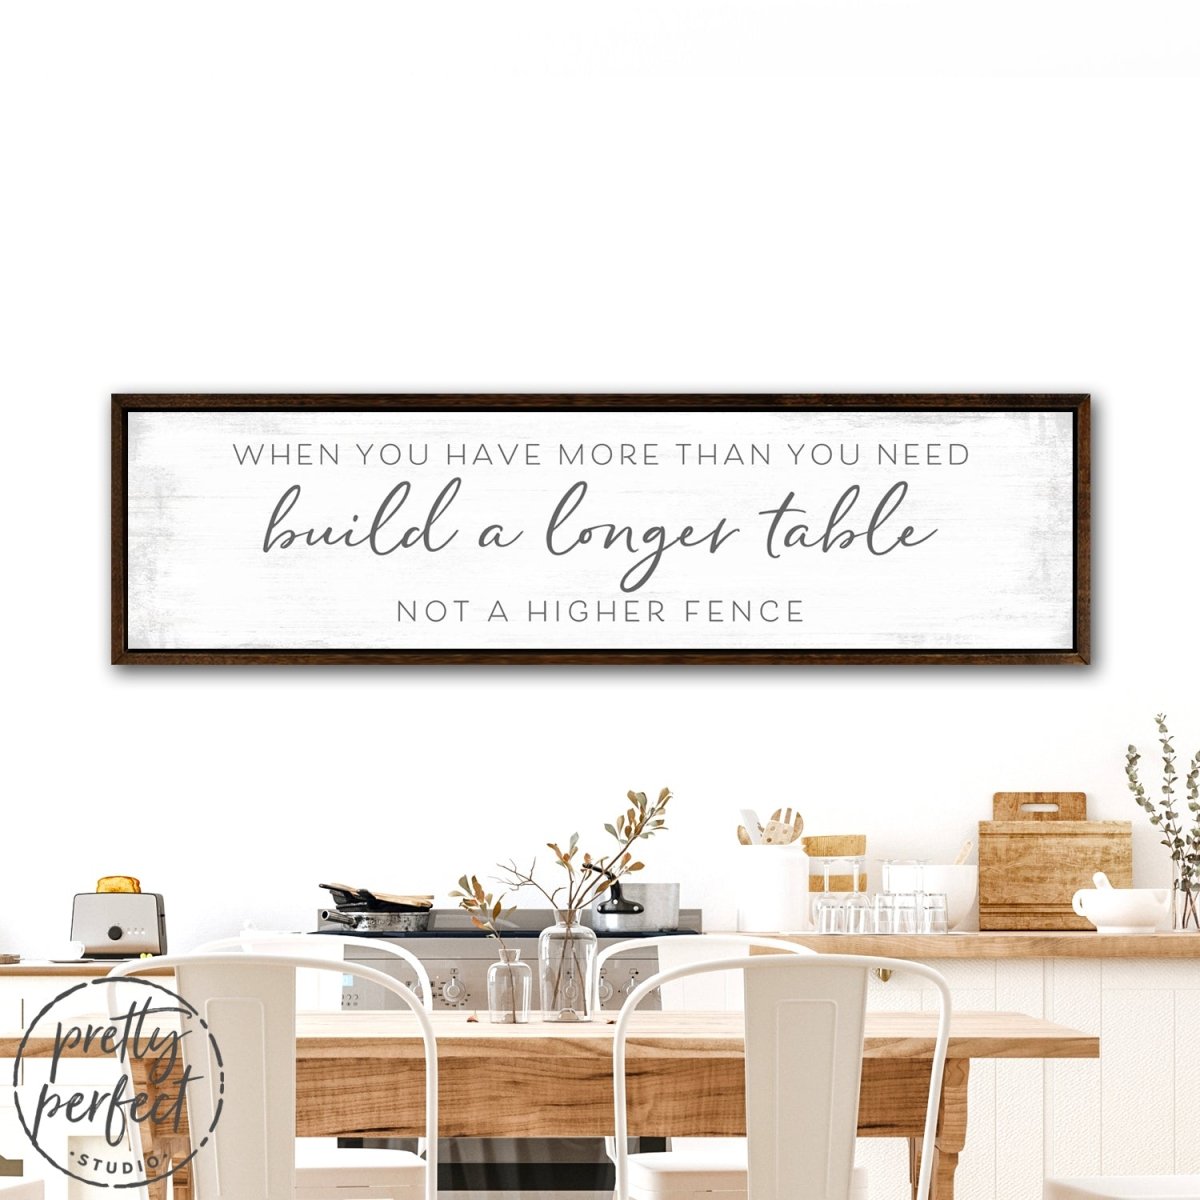 Build a Longer Table Not a Higher Fence Wall Art Sign Above Kitchen Table - Pretty Perfect Studio